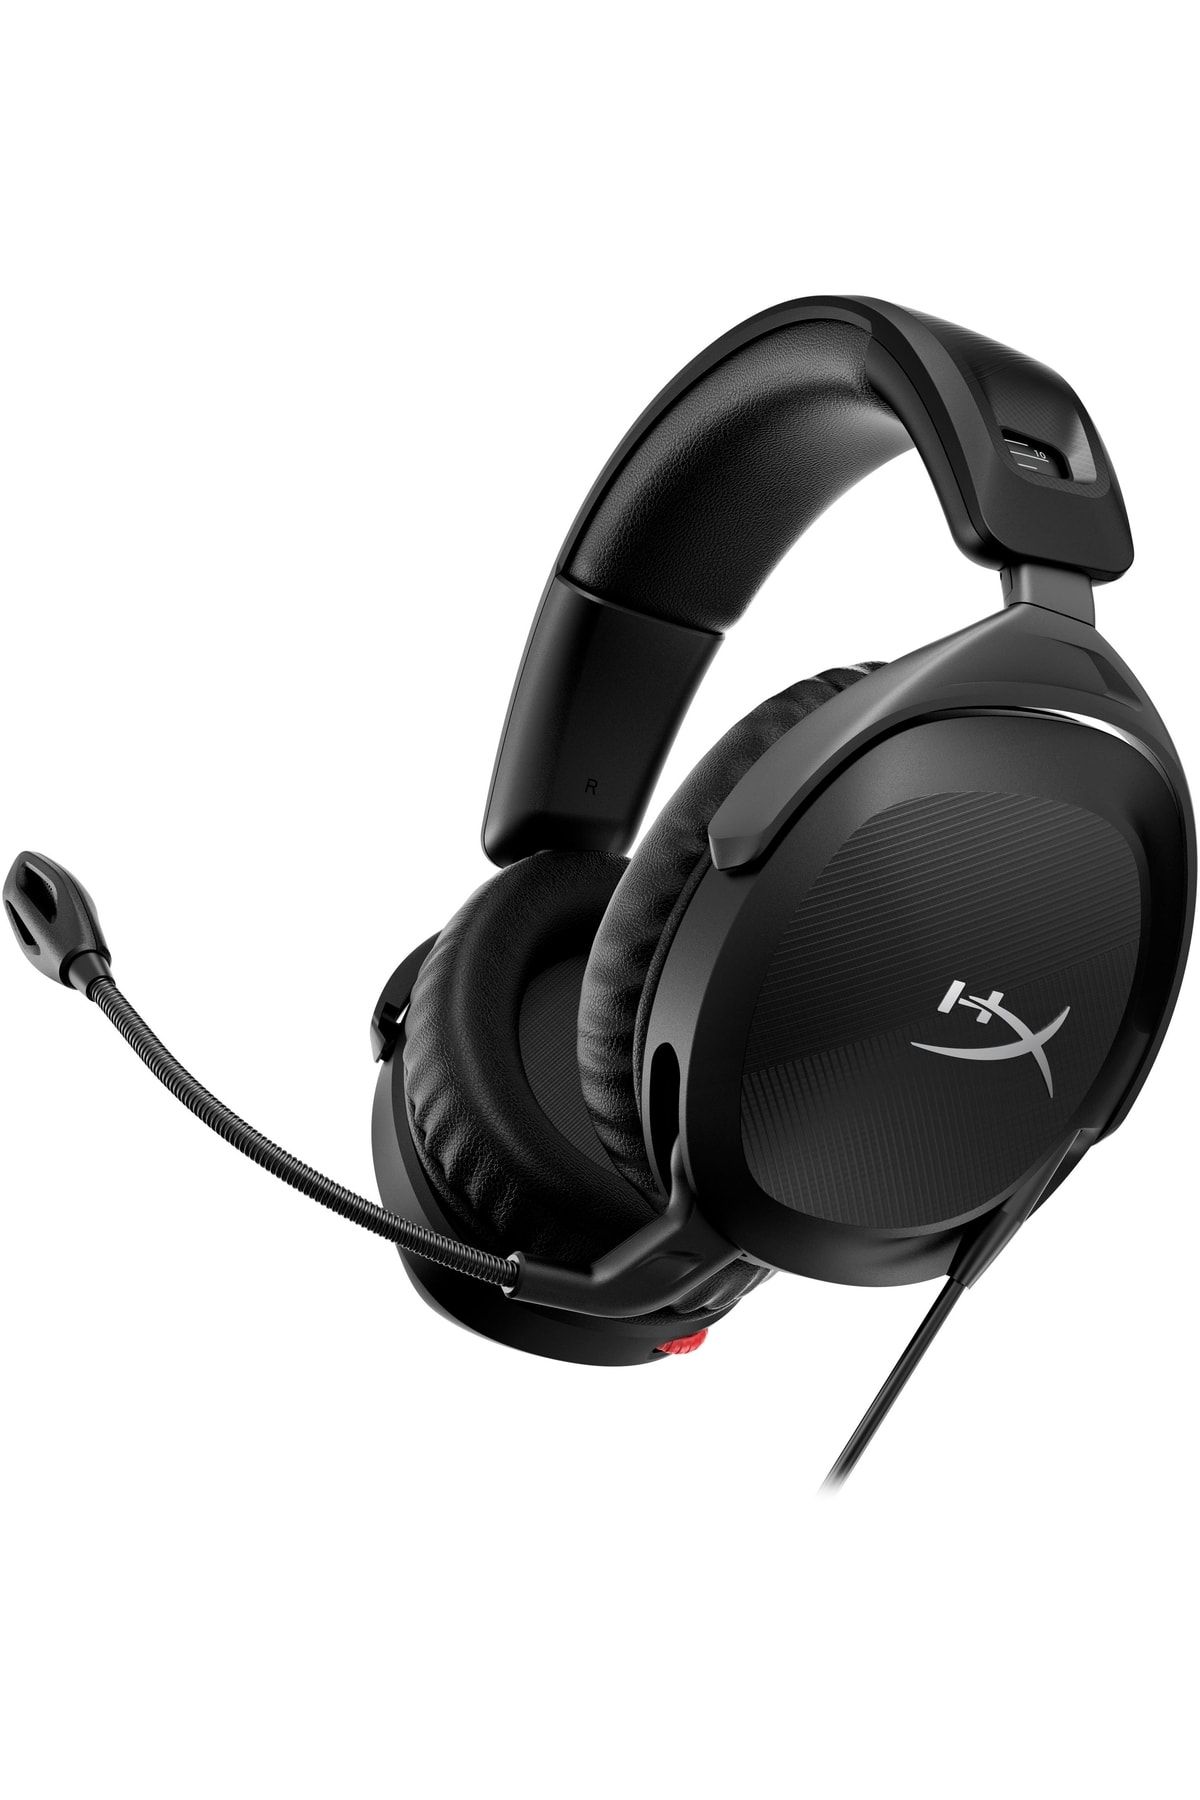 HyperX Cloud Stinger 2 Dts Headphone:x Gaming Headset For Pc